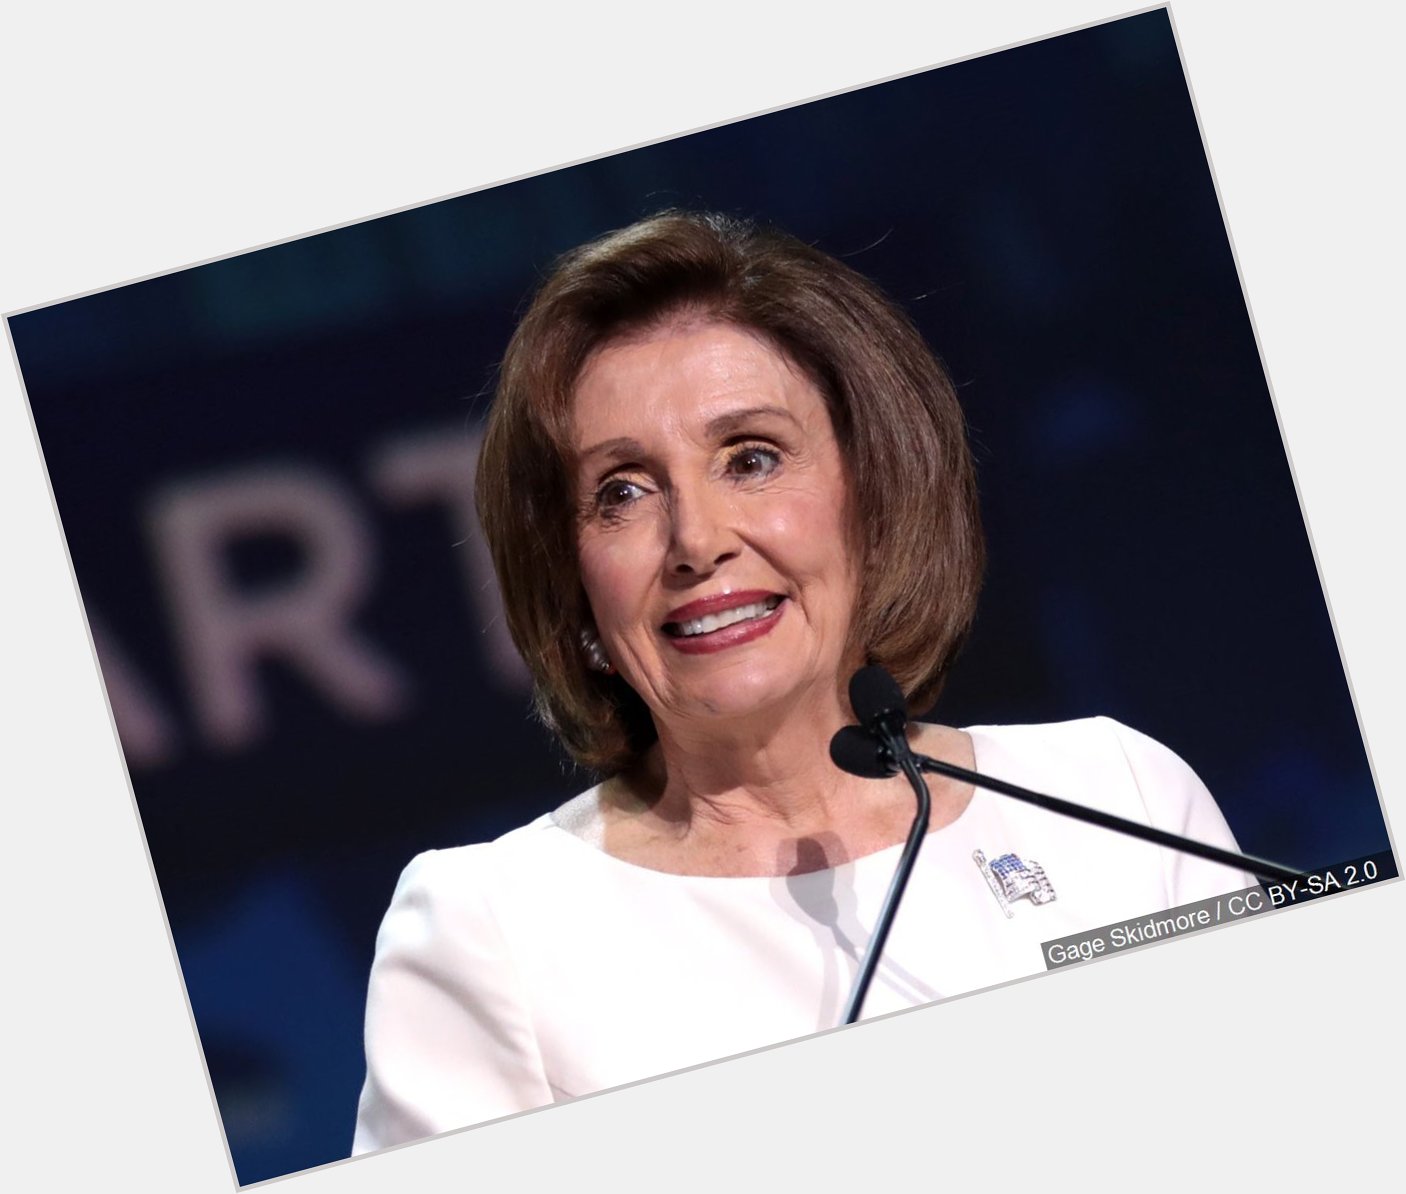   HAPPY BIRTHDAY to House Speaker Nancy Pelosi who is 80 years young today!!!   